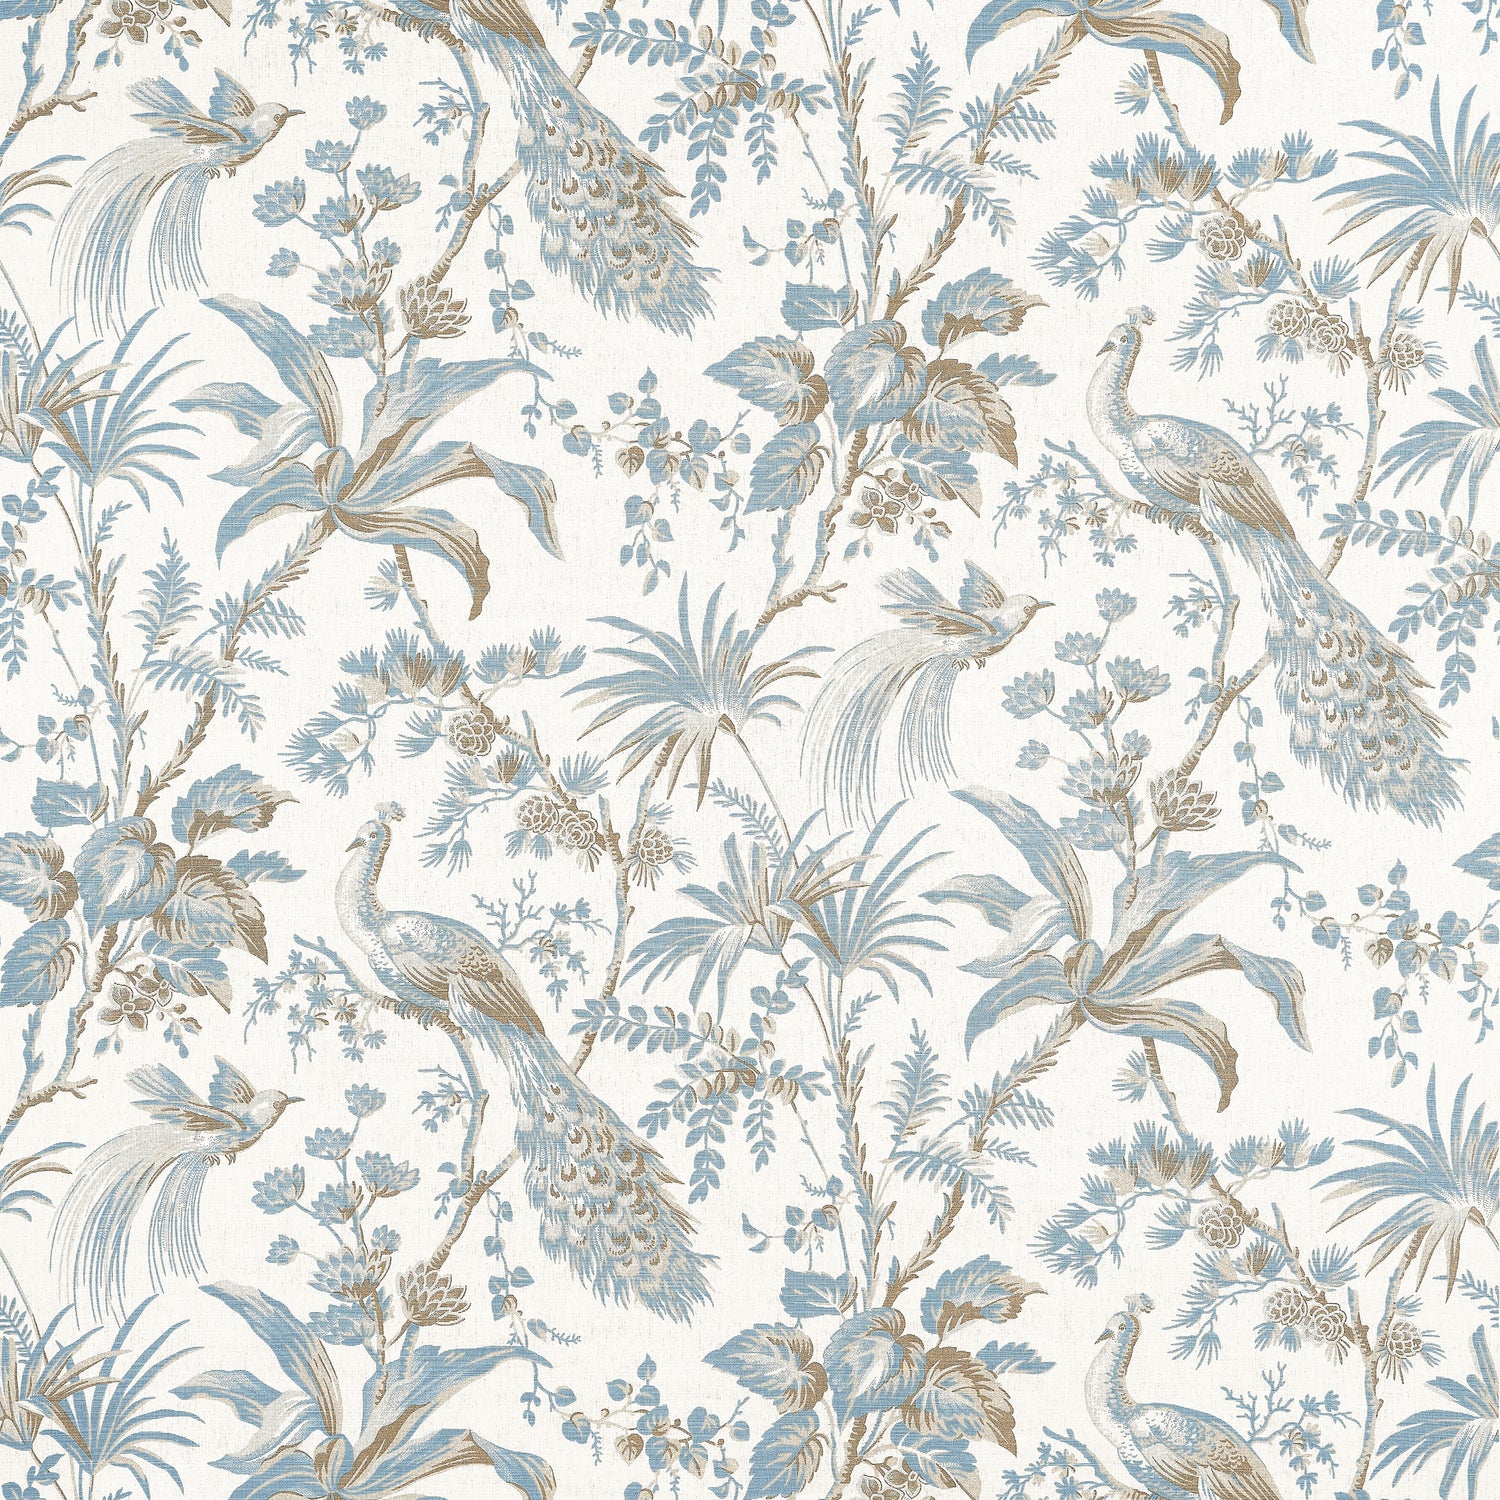 Peacock Toile fabric in soft blue and beige color - pattern number AF57828 - by Anna French in the Bristol collection